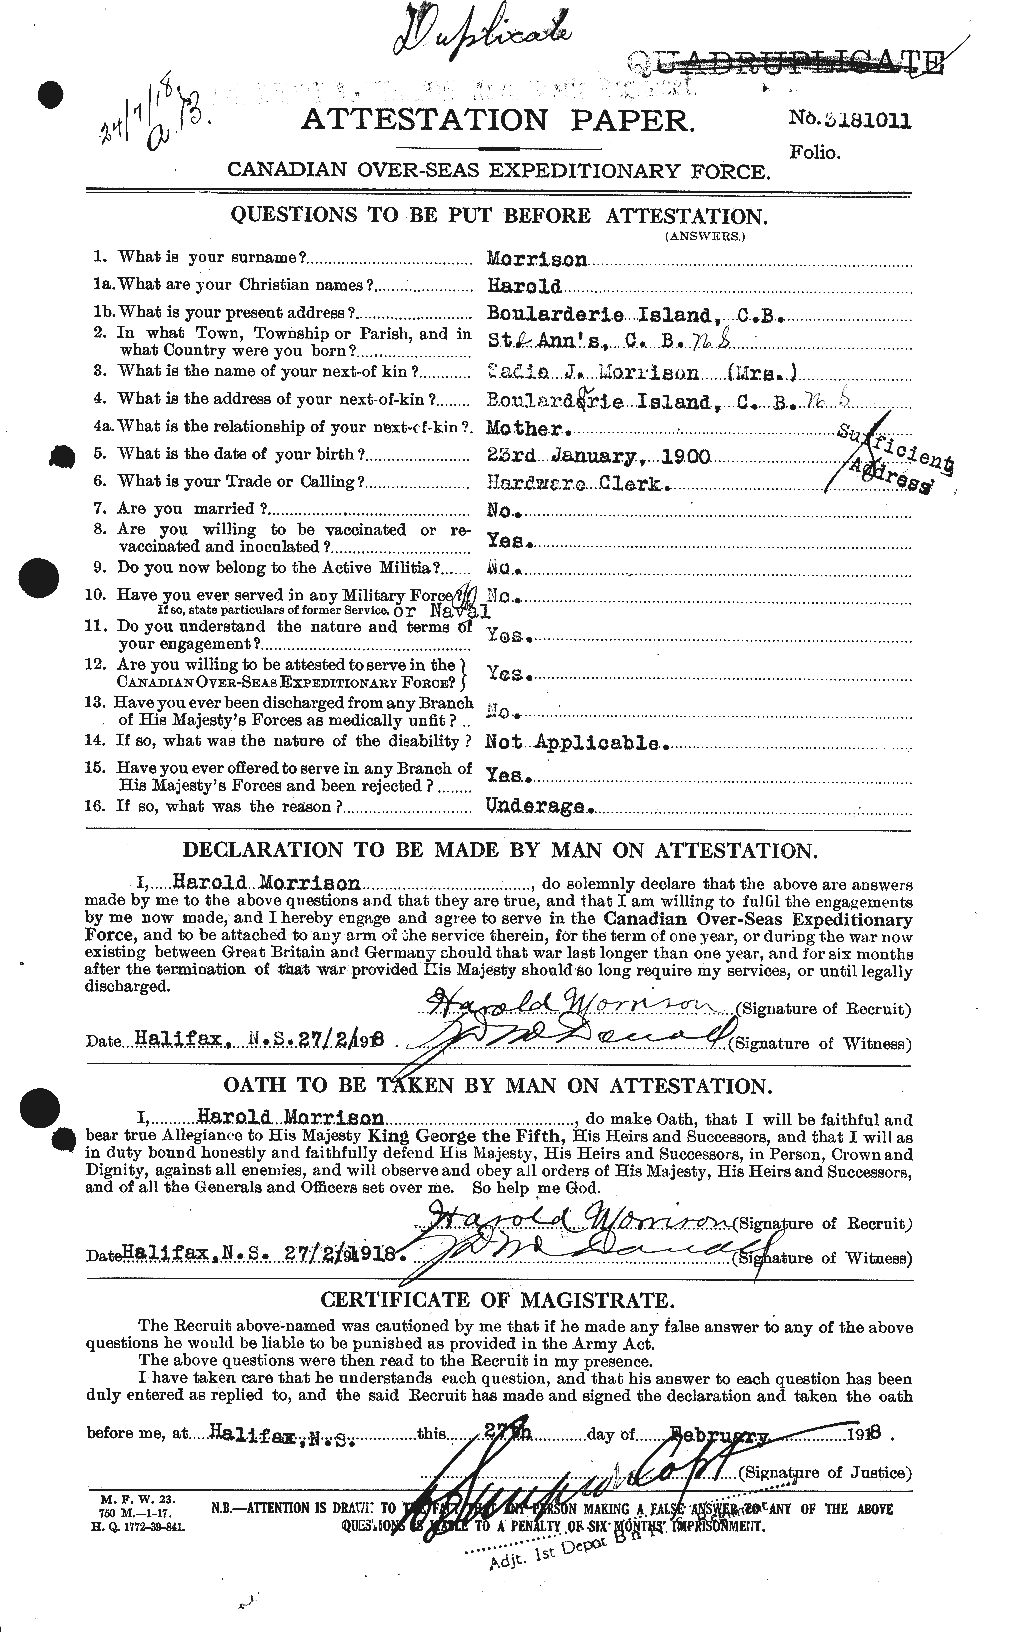 Personnel Records of the First World War - CEF 506838a